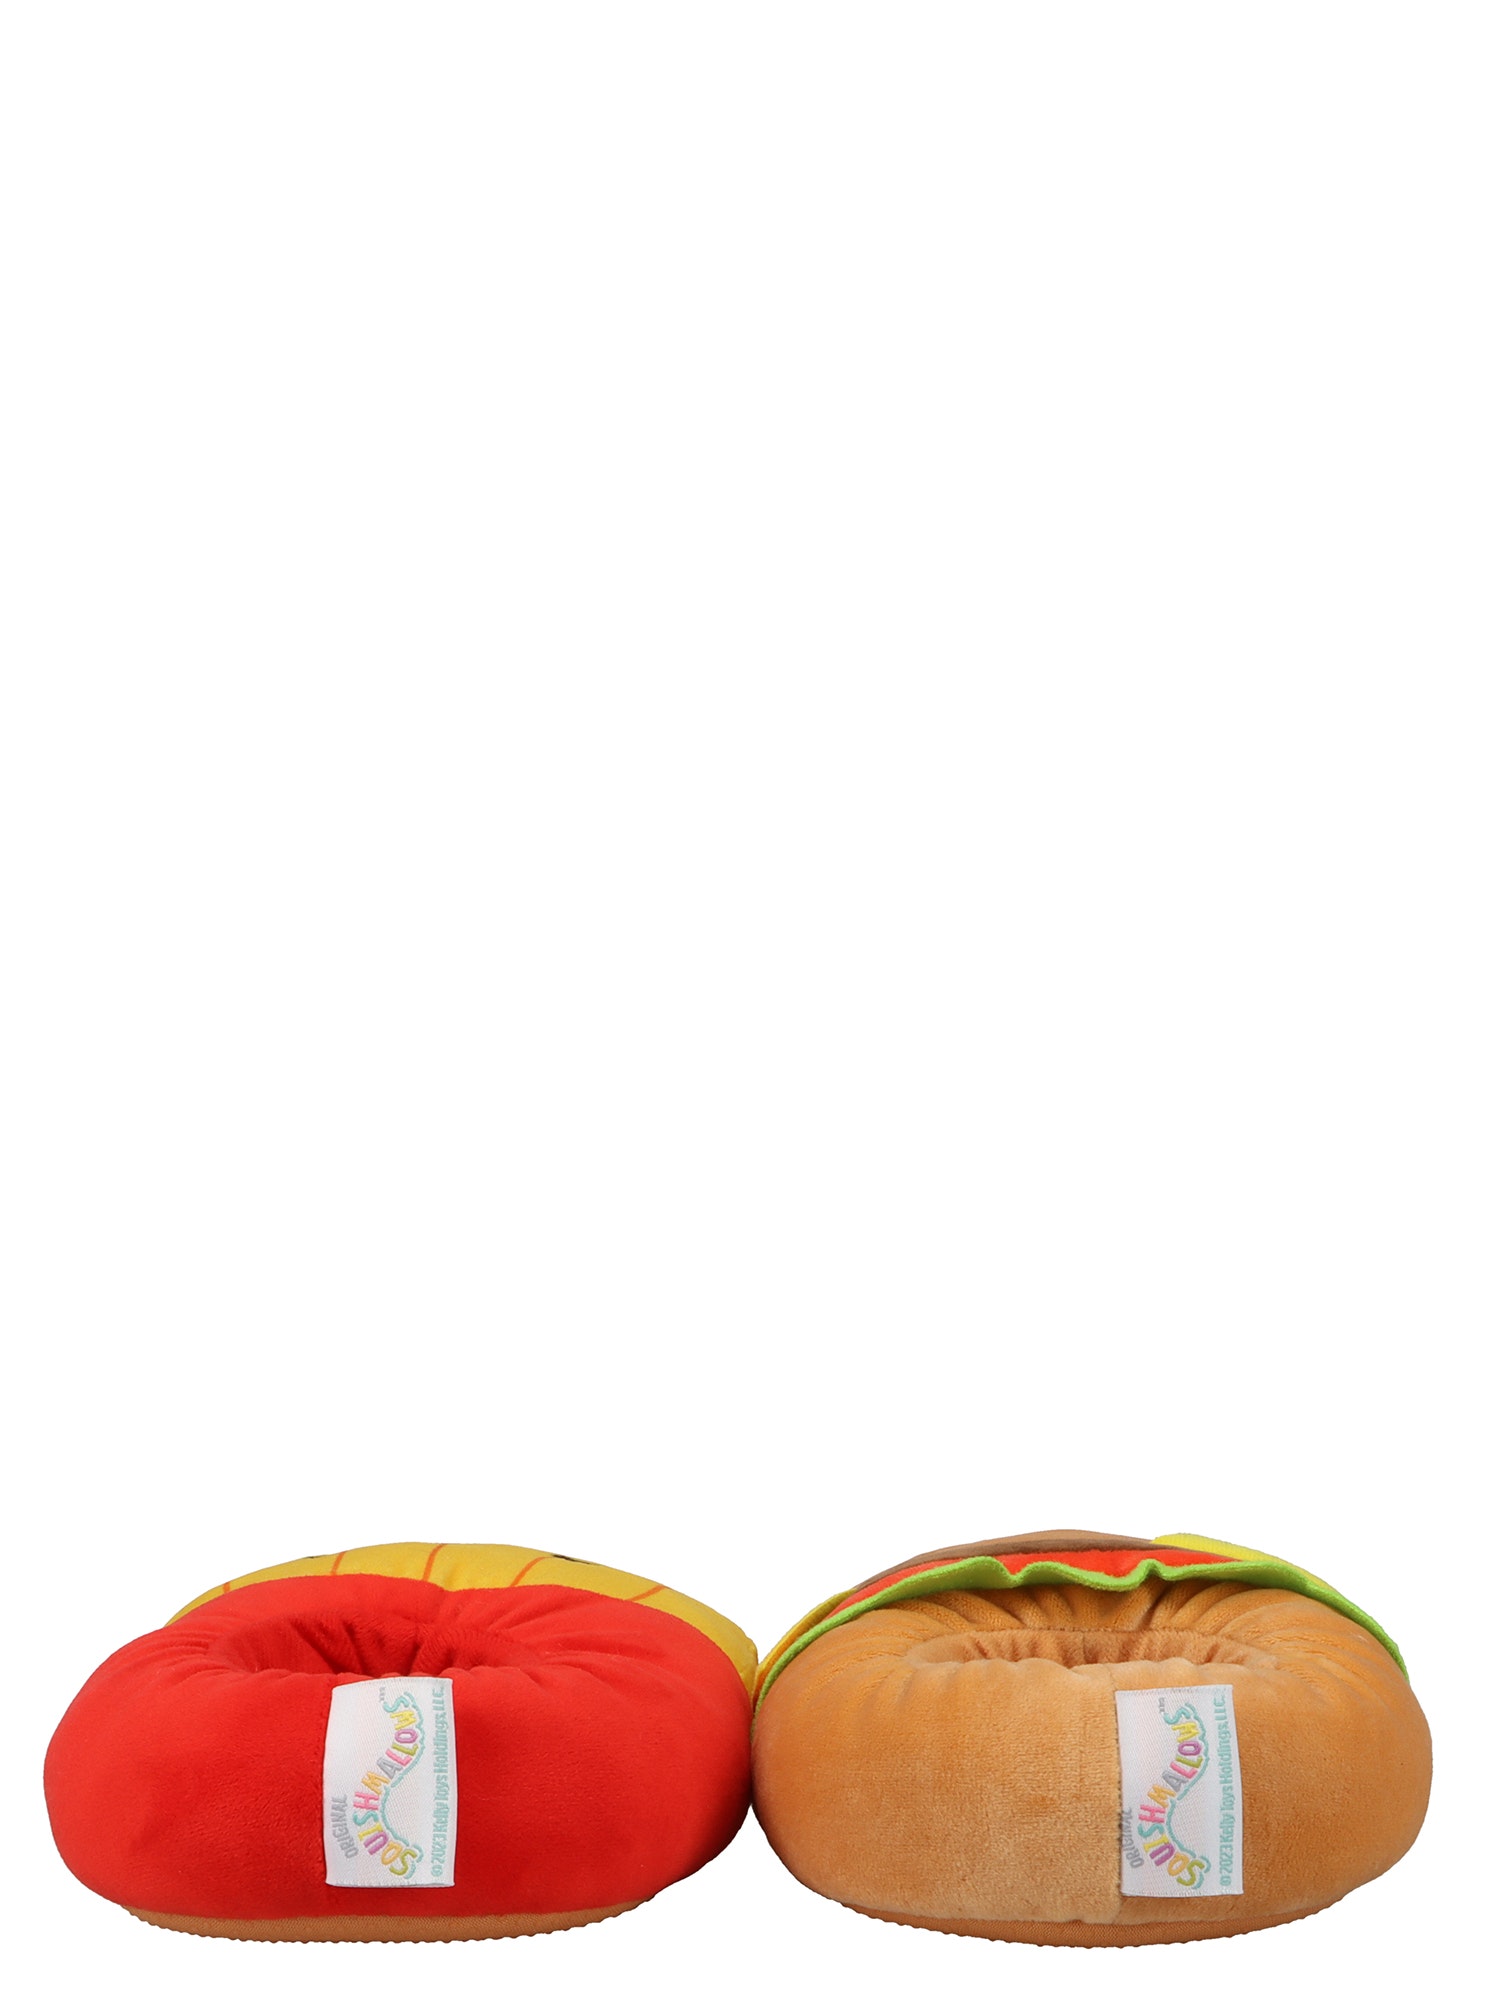 Squishmallows Kids Cheeseburger & Fries Mix Match Slippers - image 4 of 6